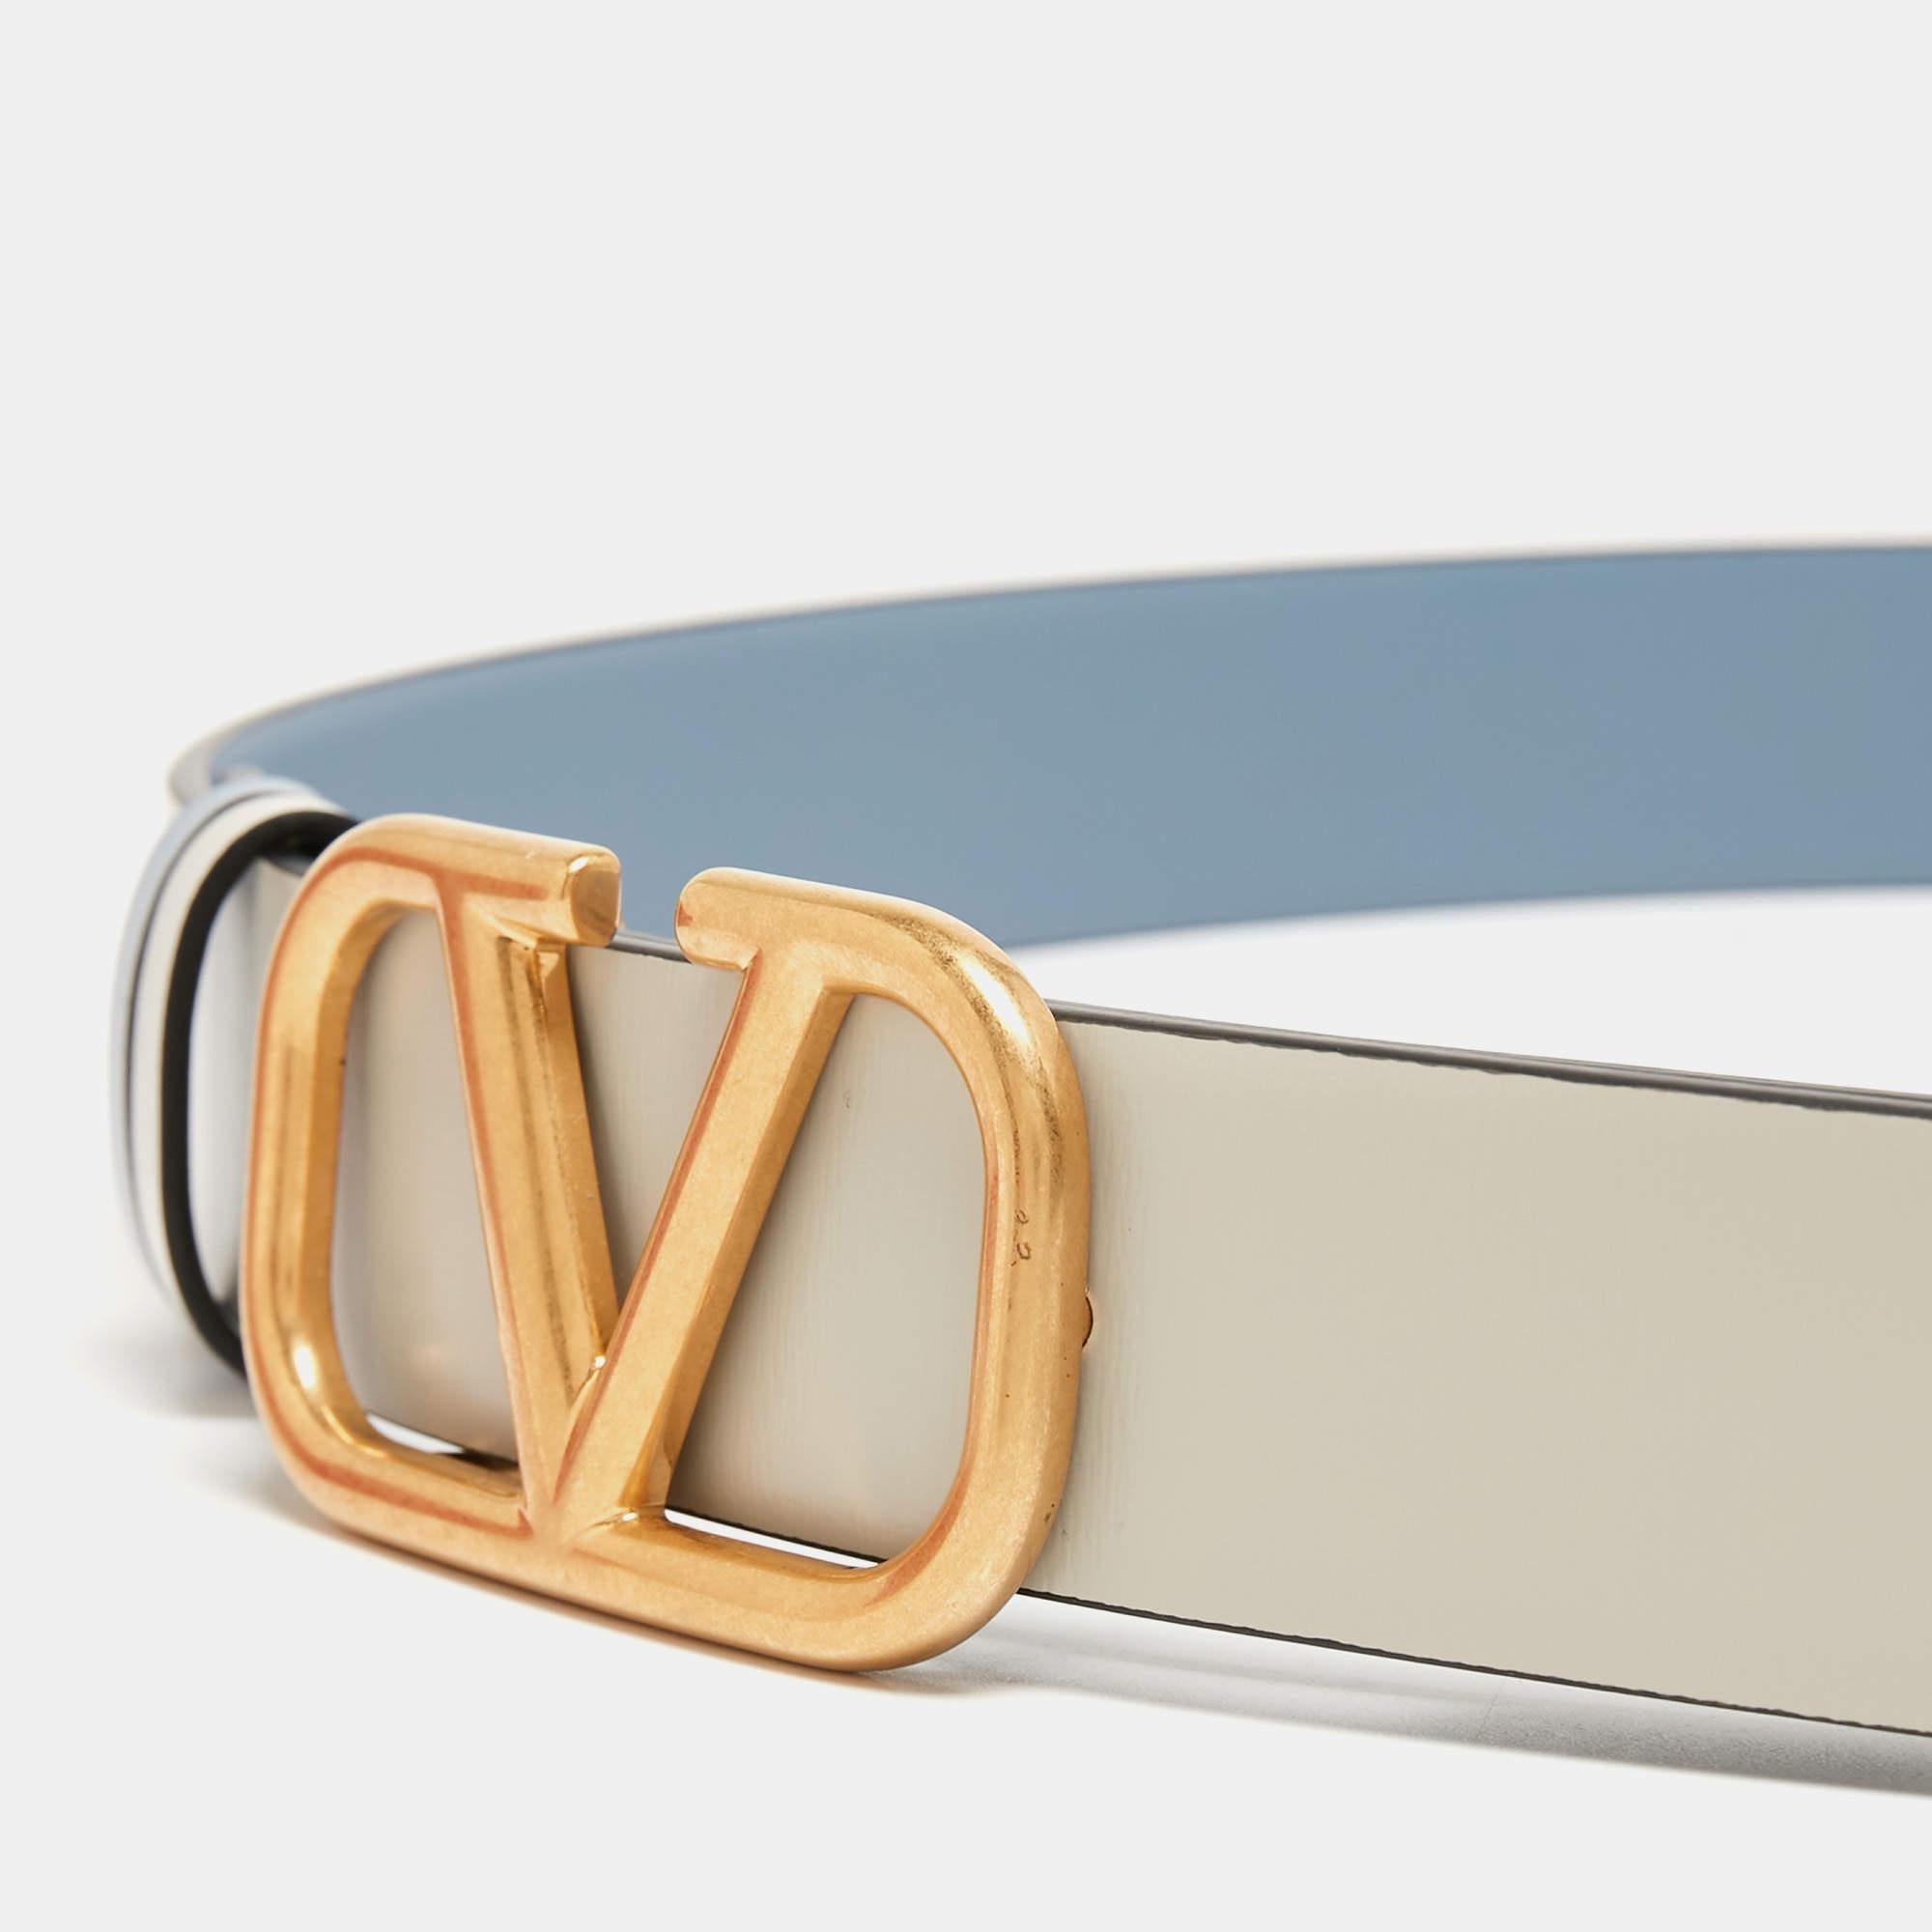 Belts are fine accessories to upgrade any basic look to a statement-making one. We particularly love this offering by Valentino. Formed using leather, the reversible belt has a VLogo buckle for an impeccable finish.

Includes: Original Dustbag,